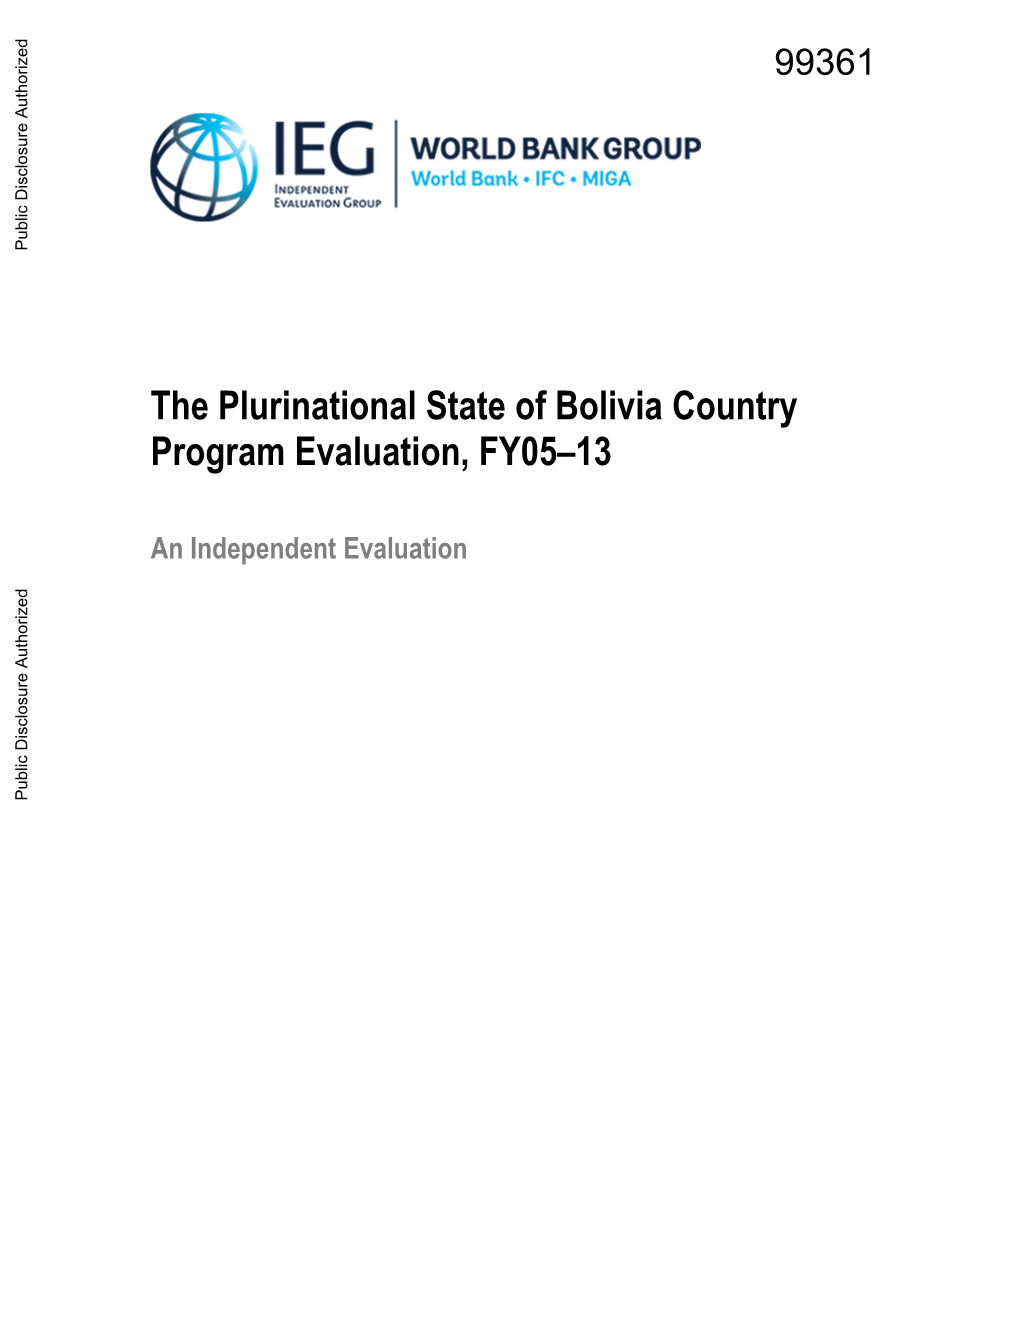 The Plurinational State of Bolivia Country Program Evaluation, FY05